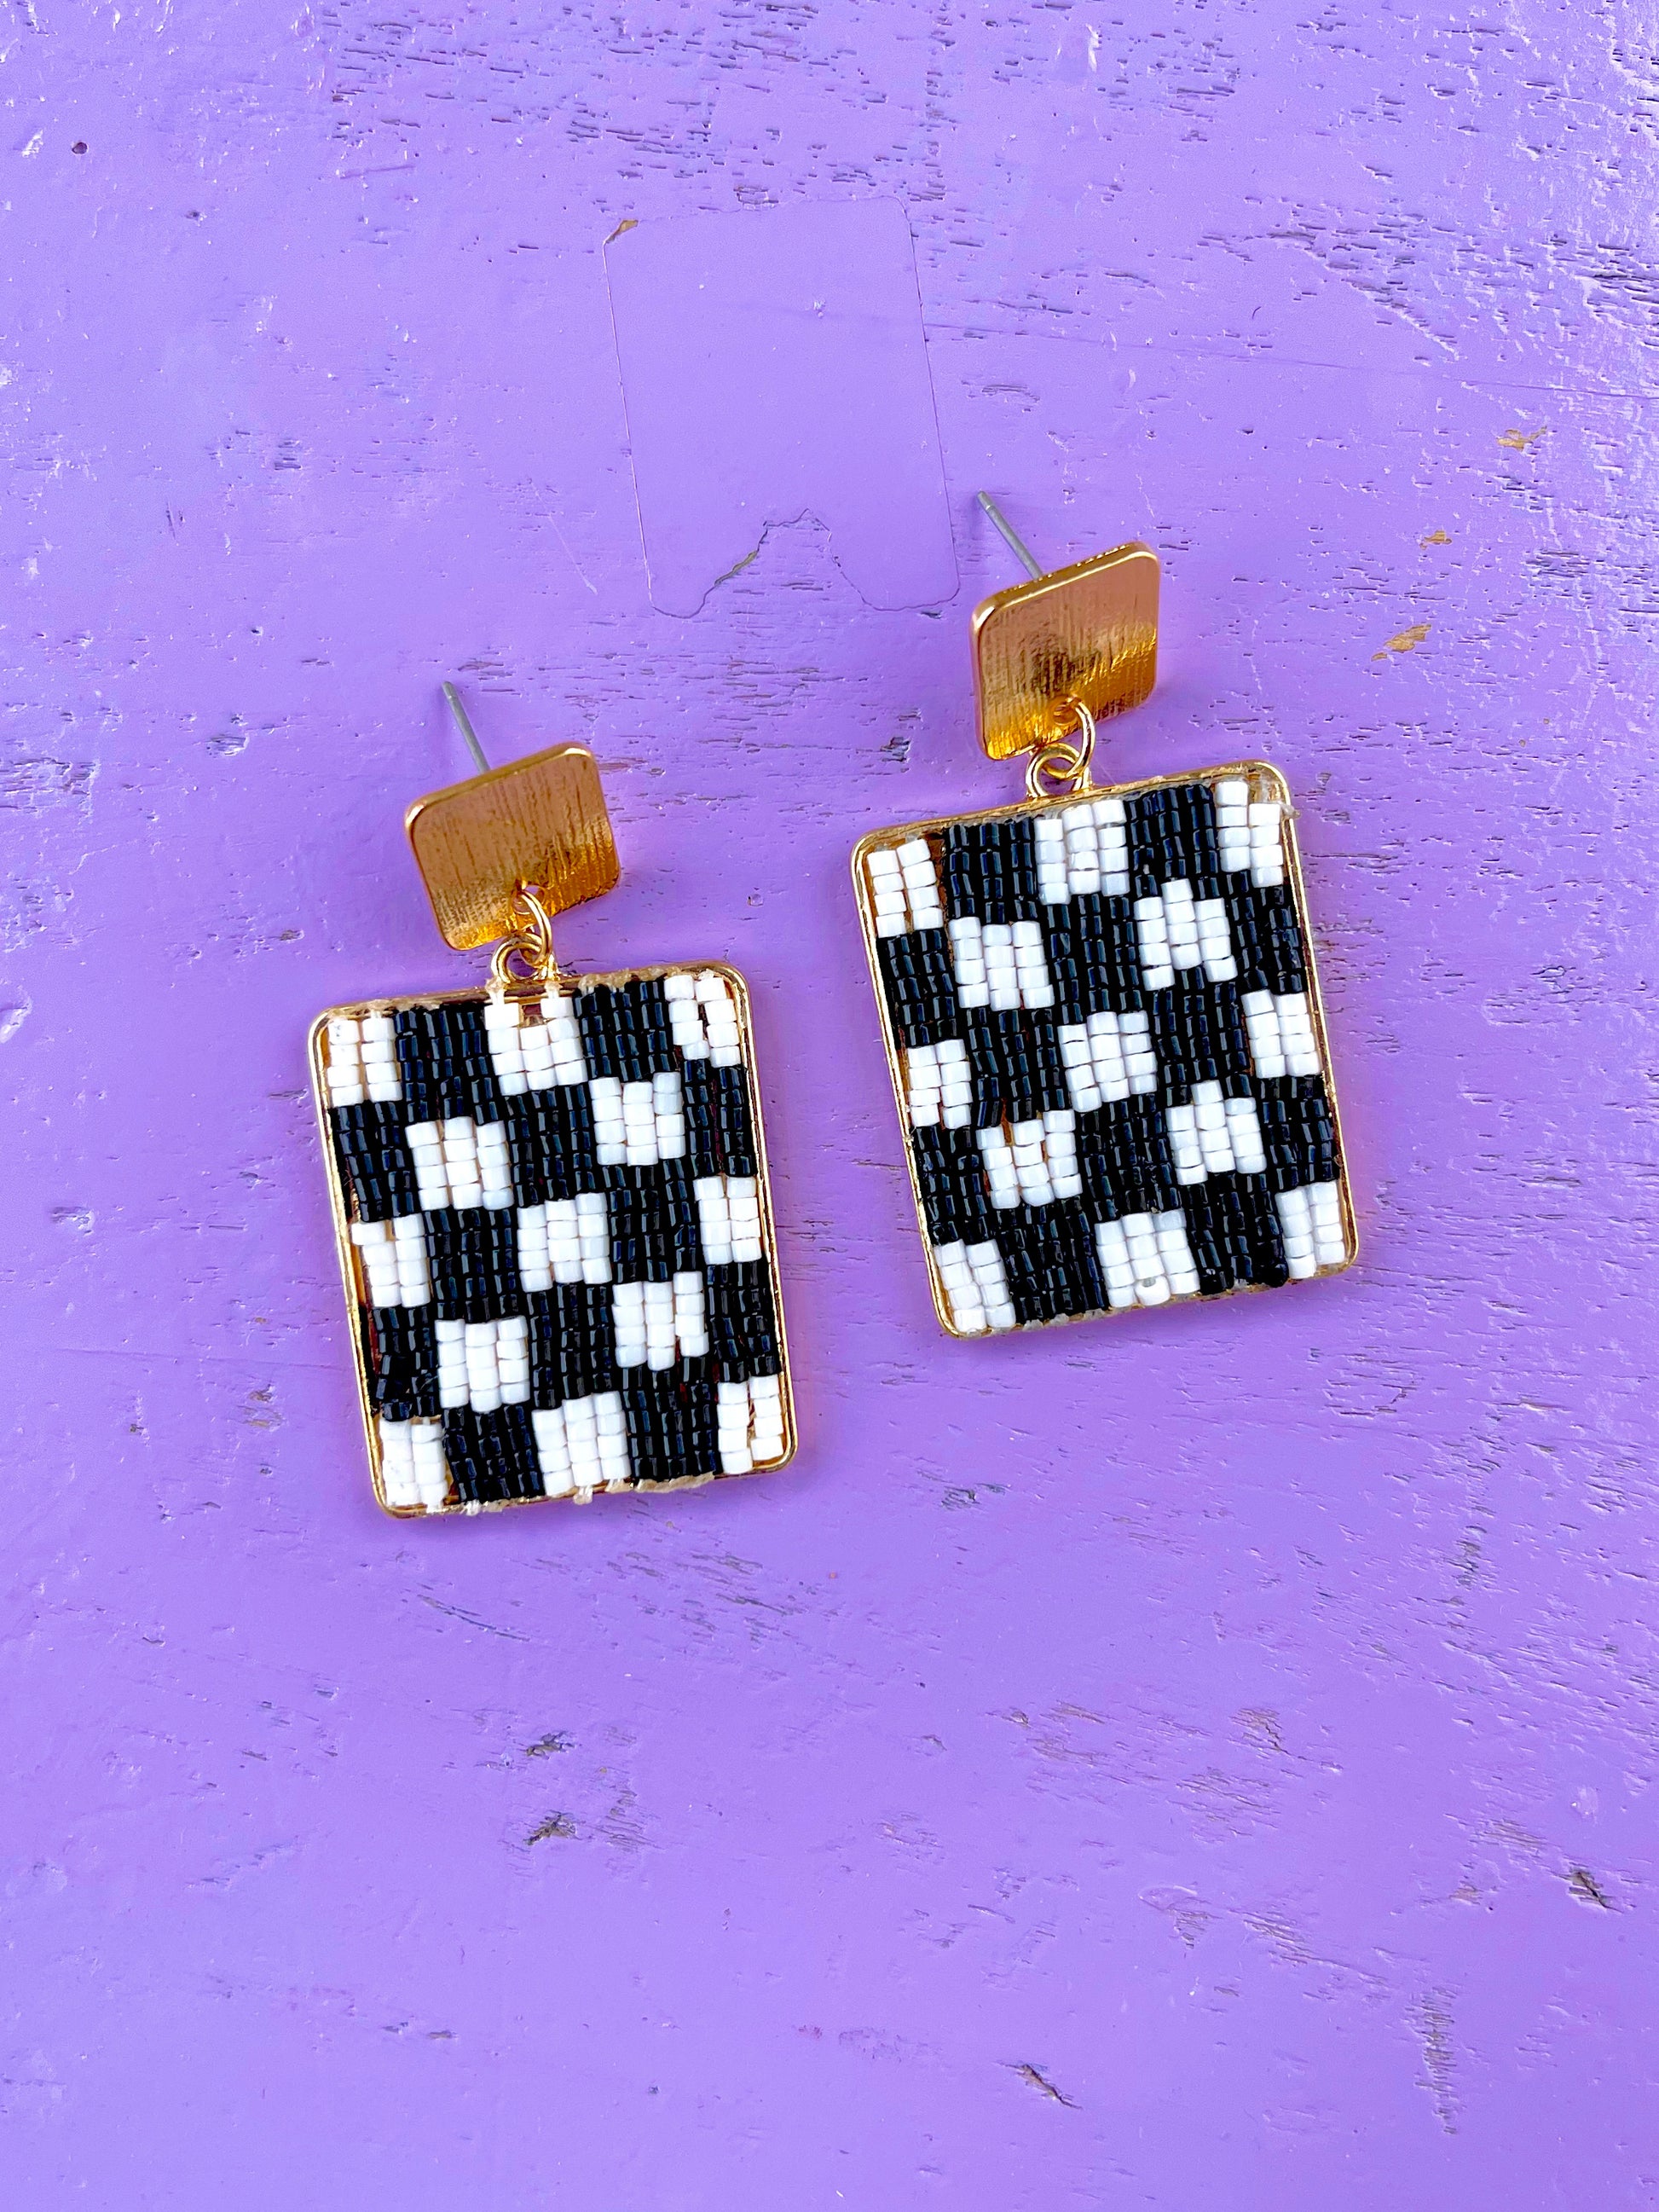 Finish Line Earrings-Earrings-Golden Stella-The Village Shoppe, Women’s Fashion Boutique, Shop Online and In Store - Located in Muscle Shoals, AL.